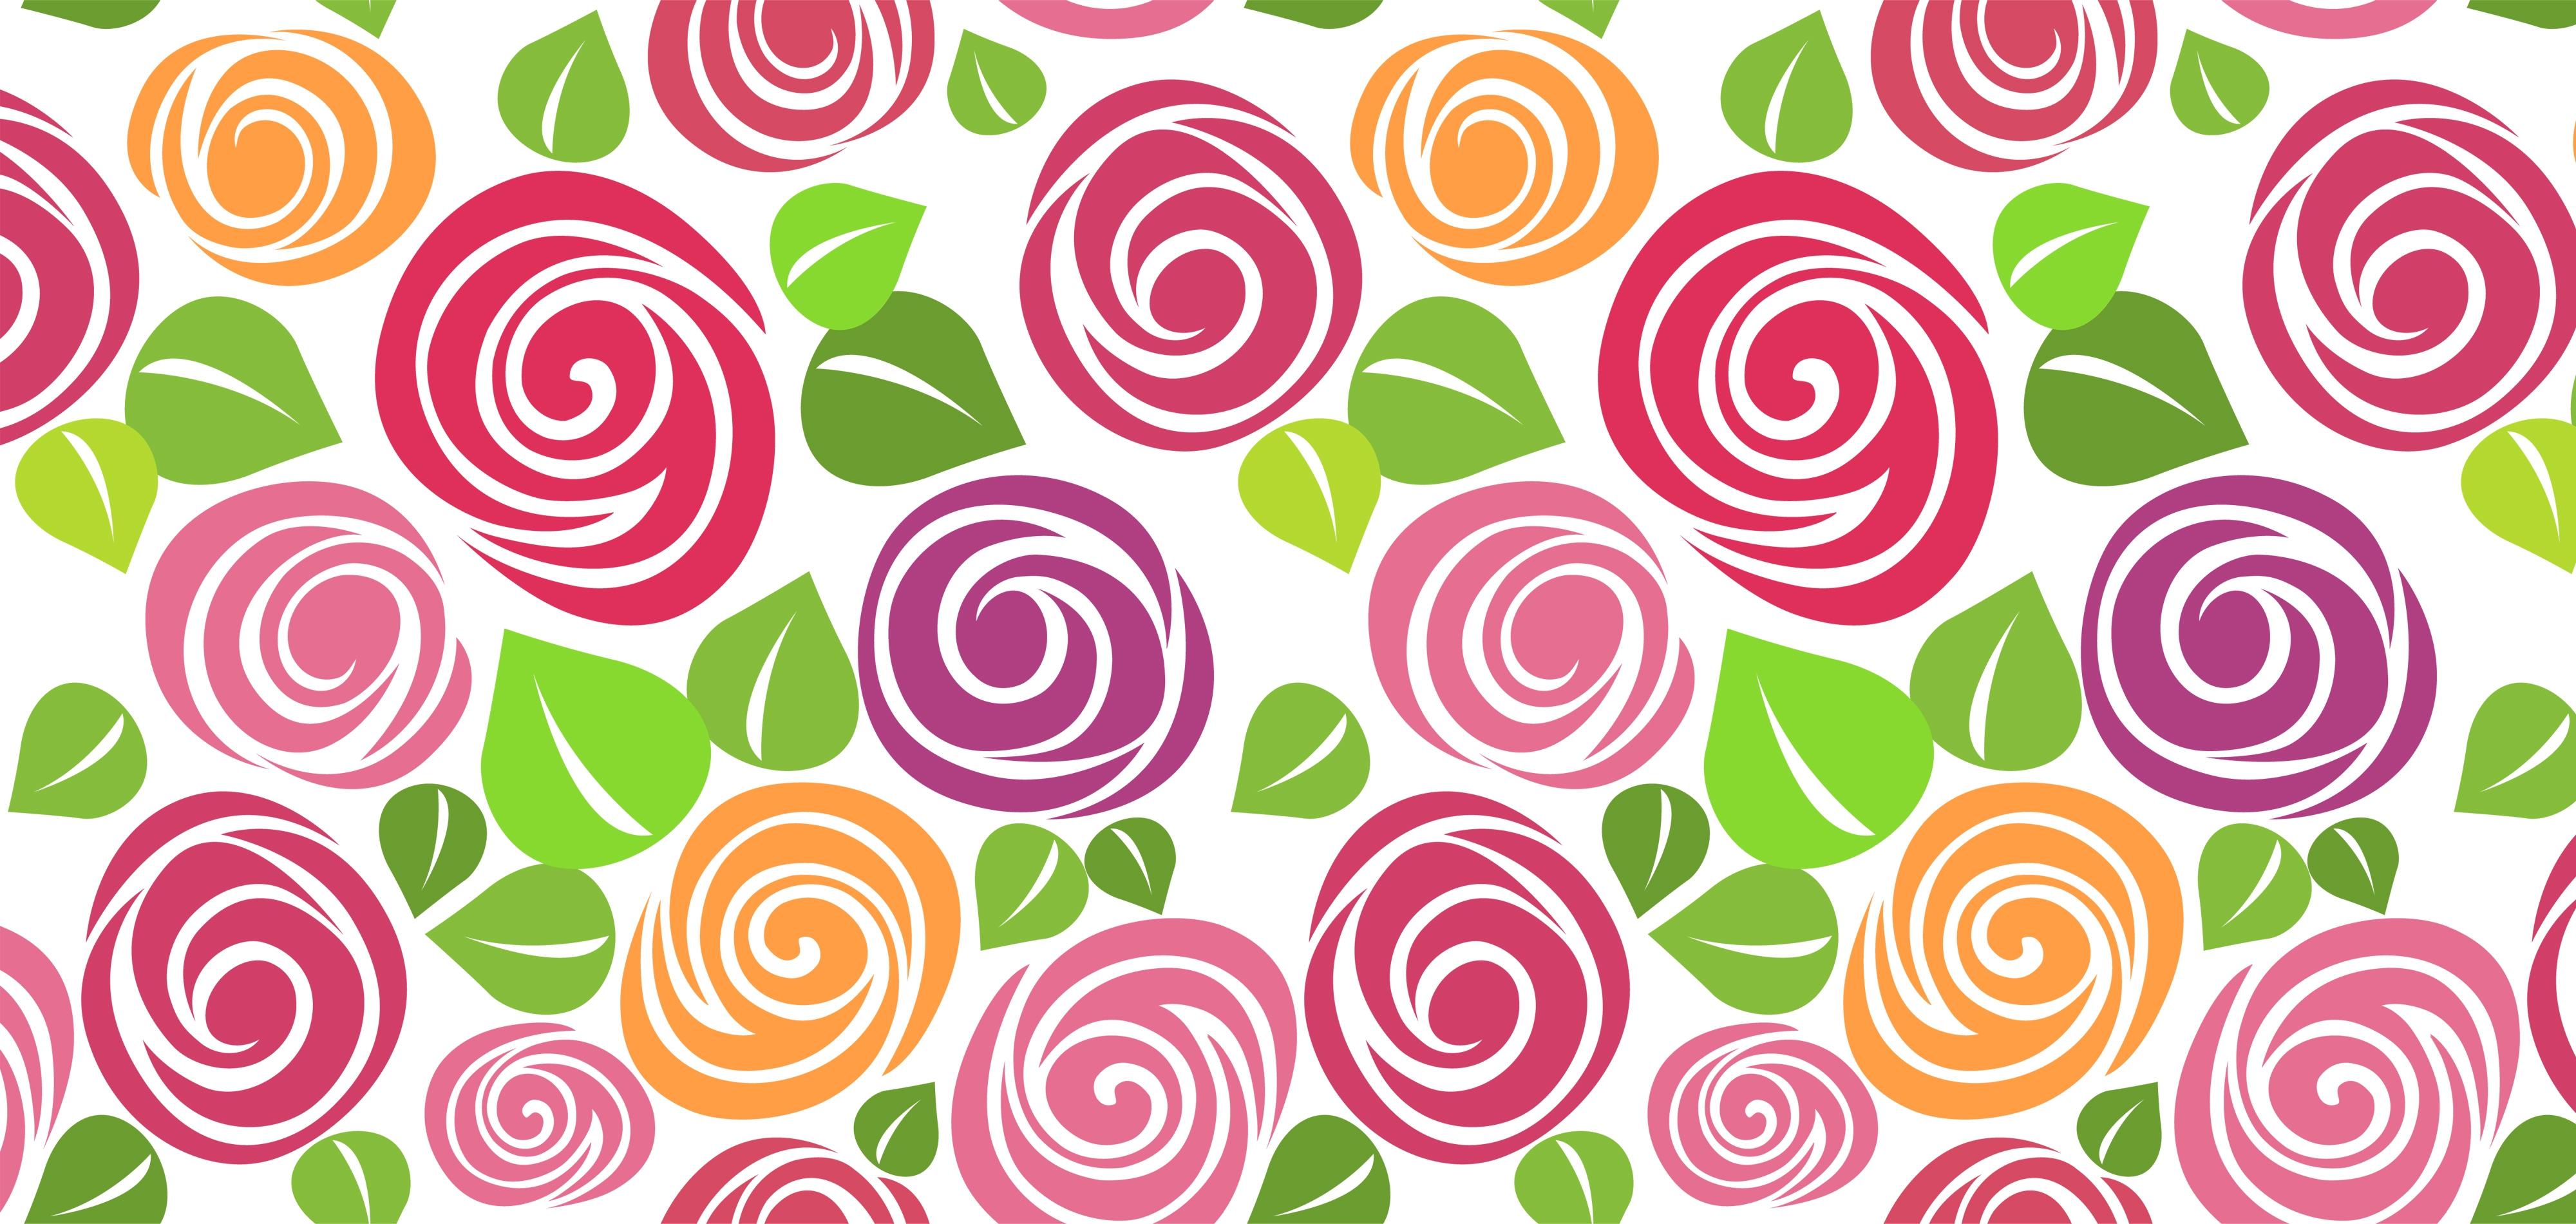 Download wallpaper 4000x1900 roses, background, picture, colors